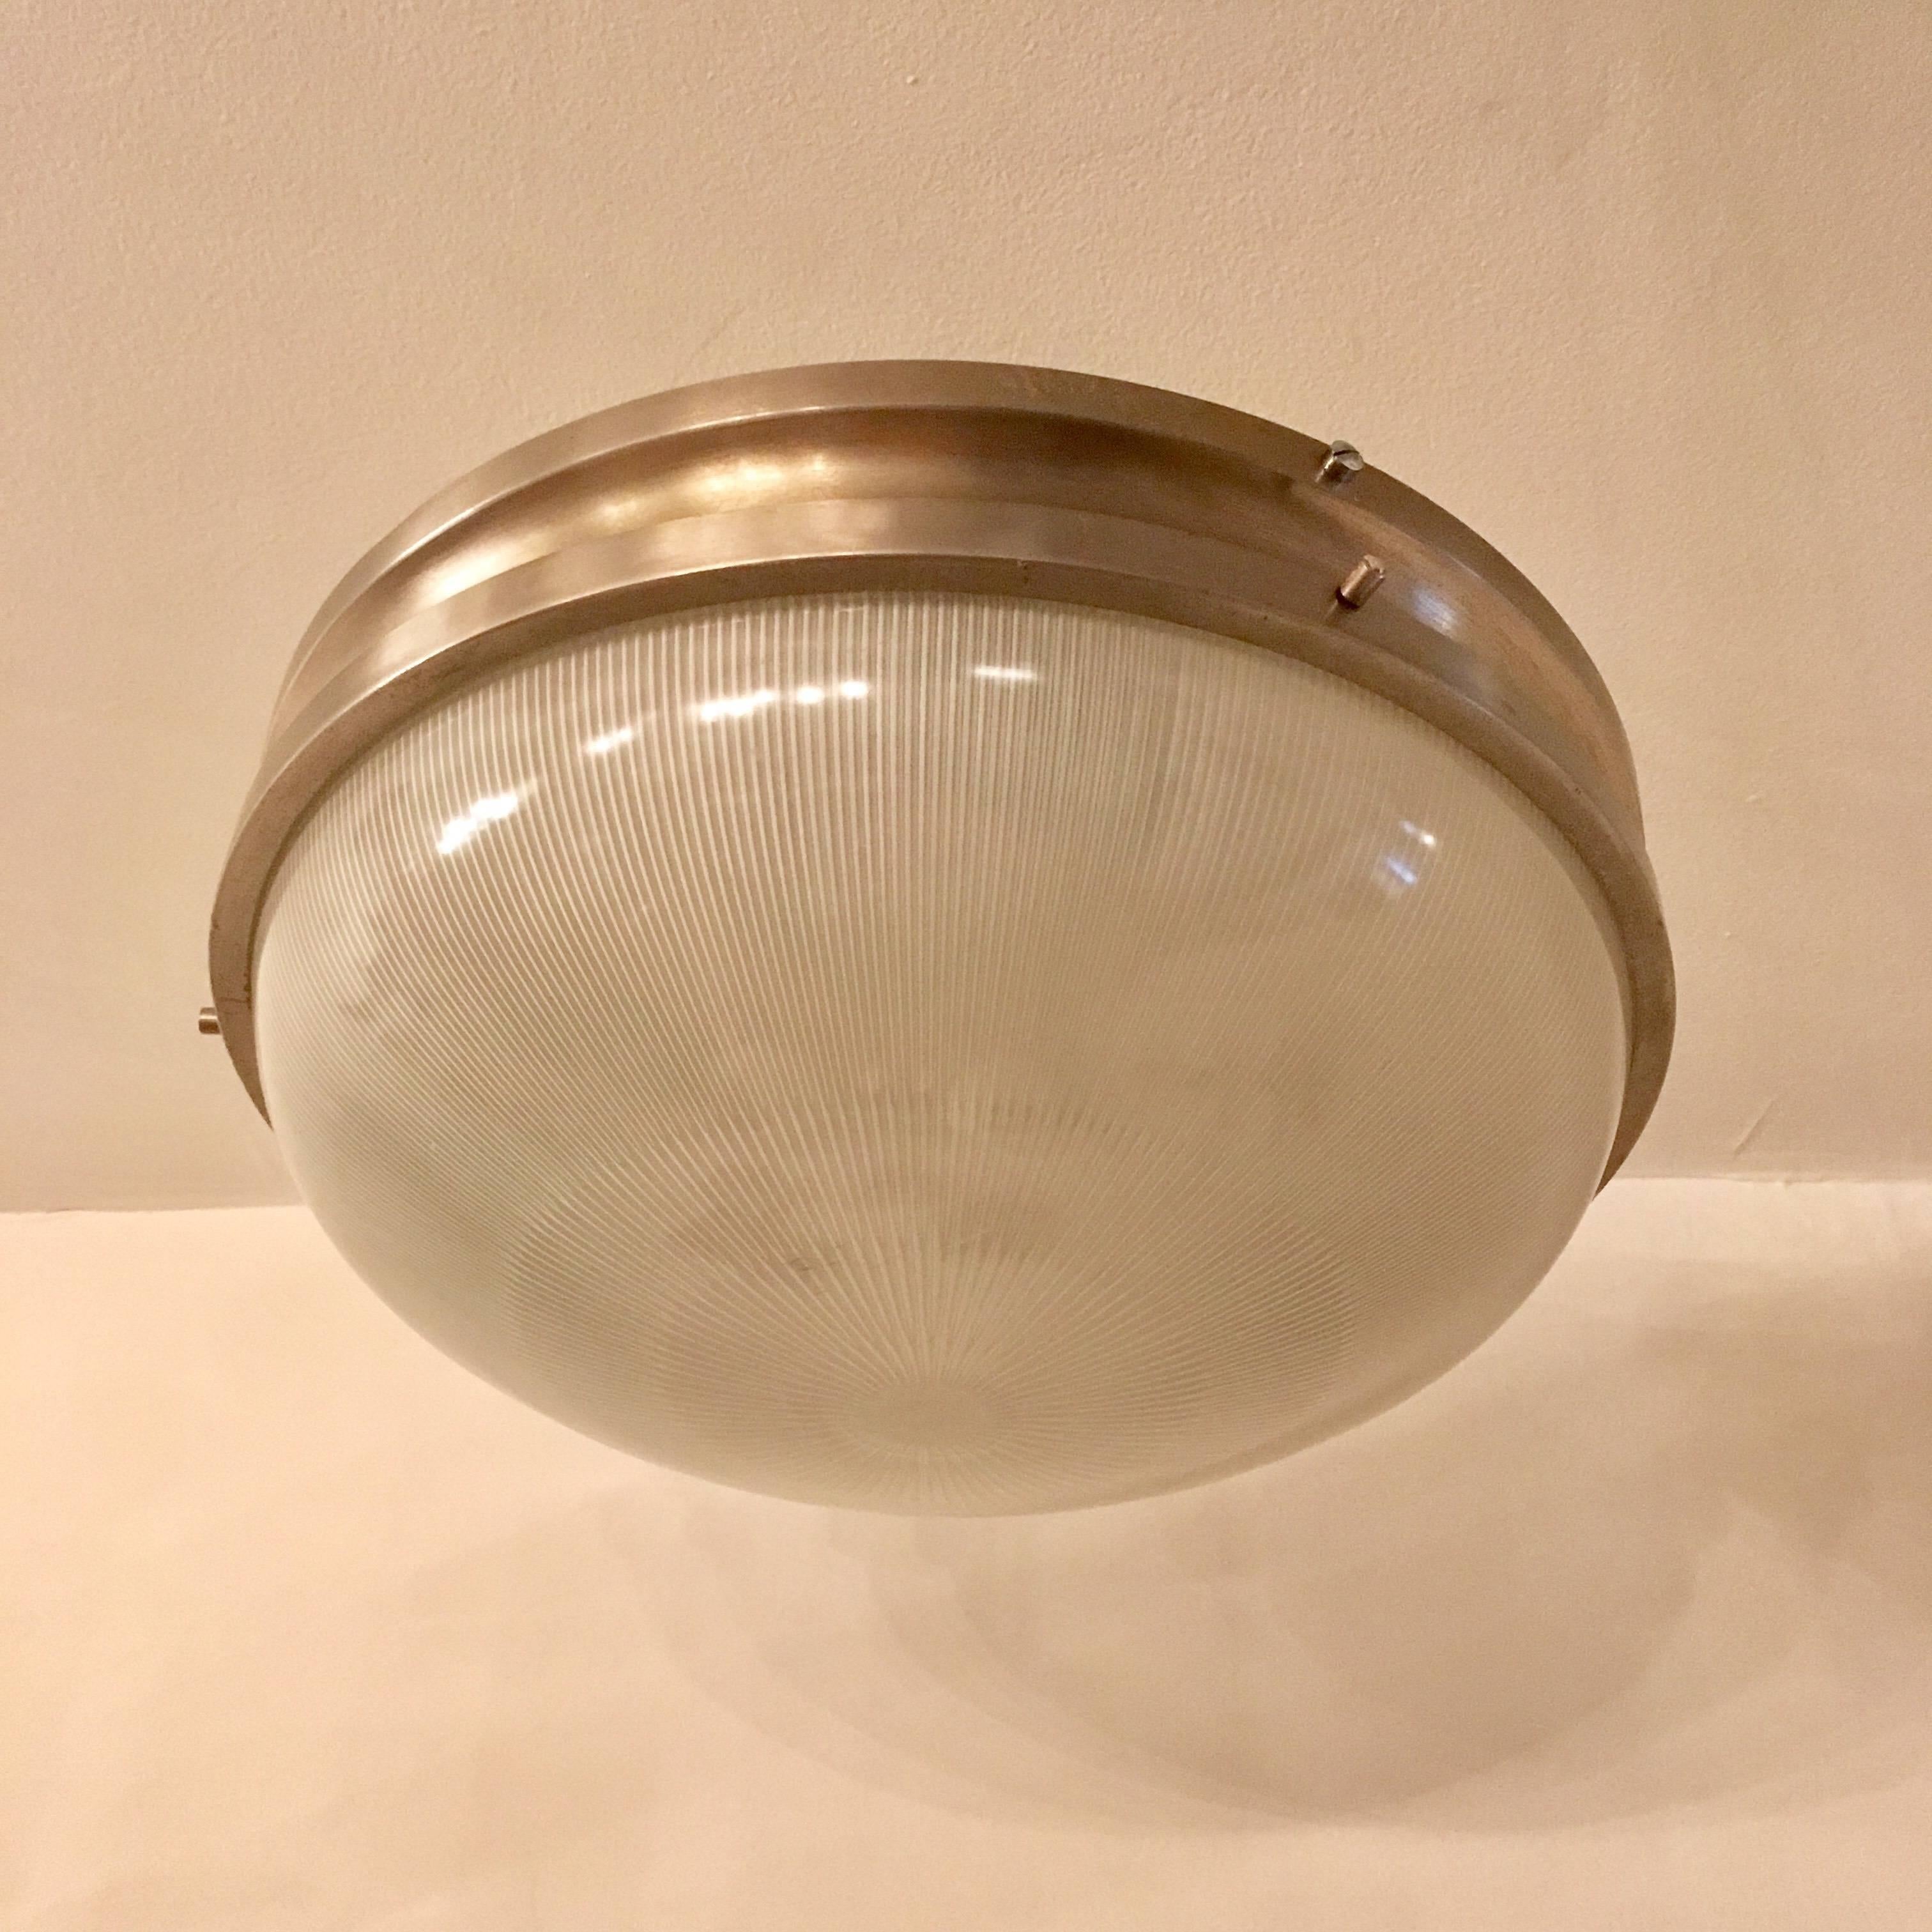 An original 1960s, Italian Mid-Century flush ceiling light or wall sconce designed by Sergio Mazza for Artemide. A Holophane glass shade and an Industrial matte silver fixture. Newly rewired.